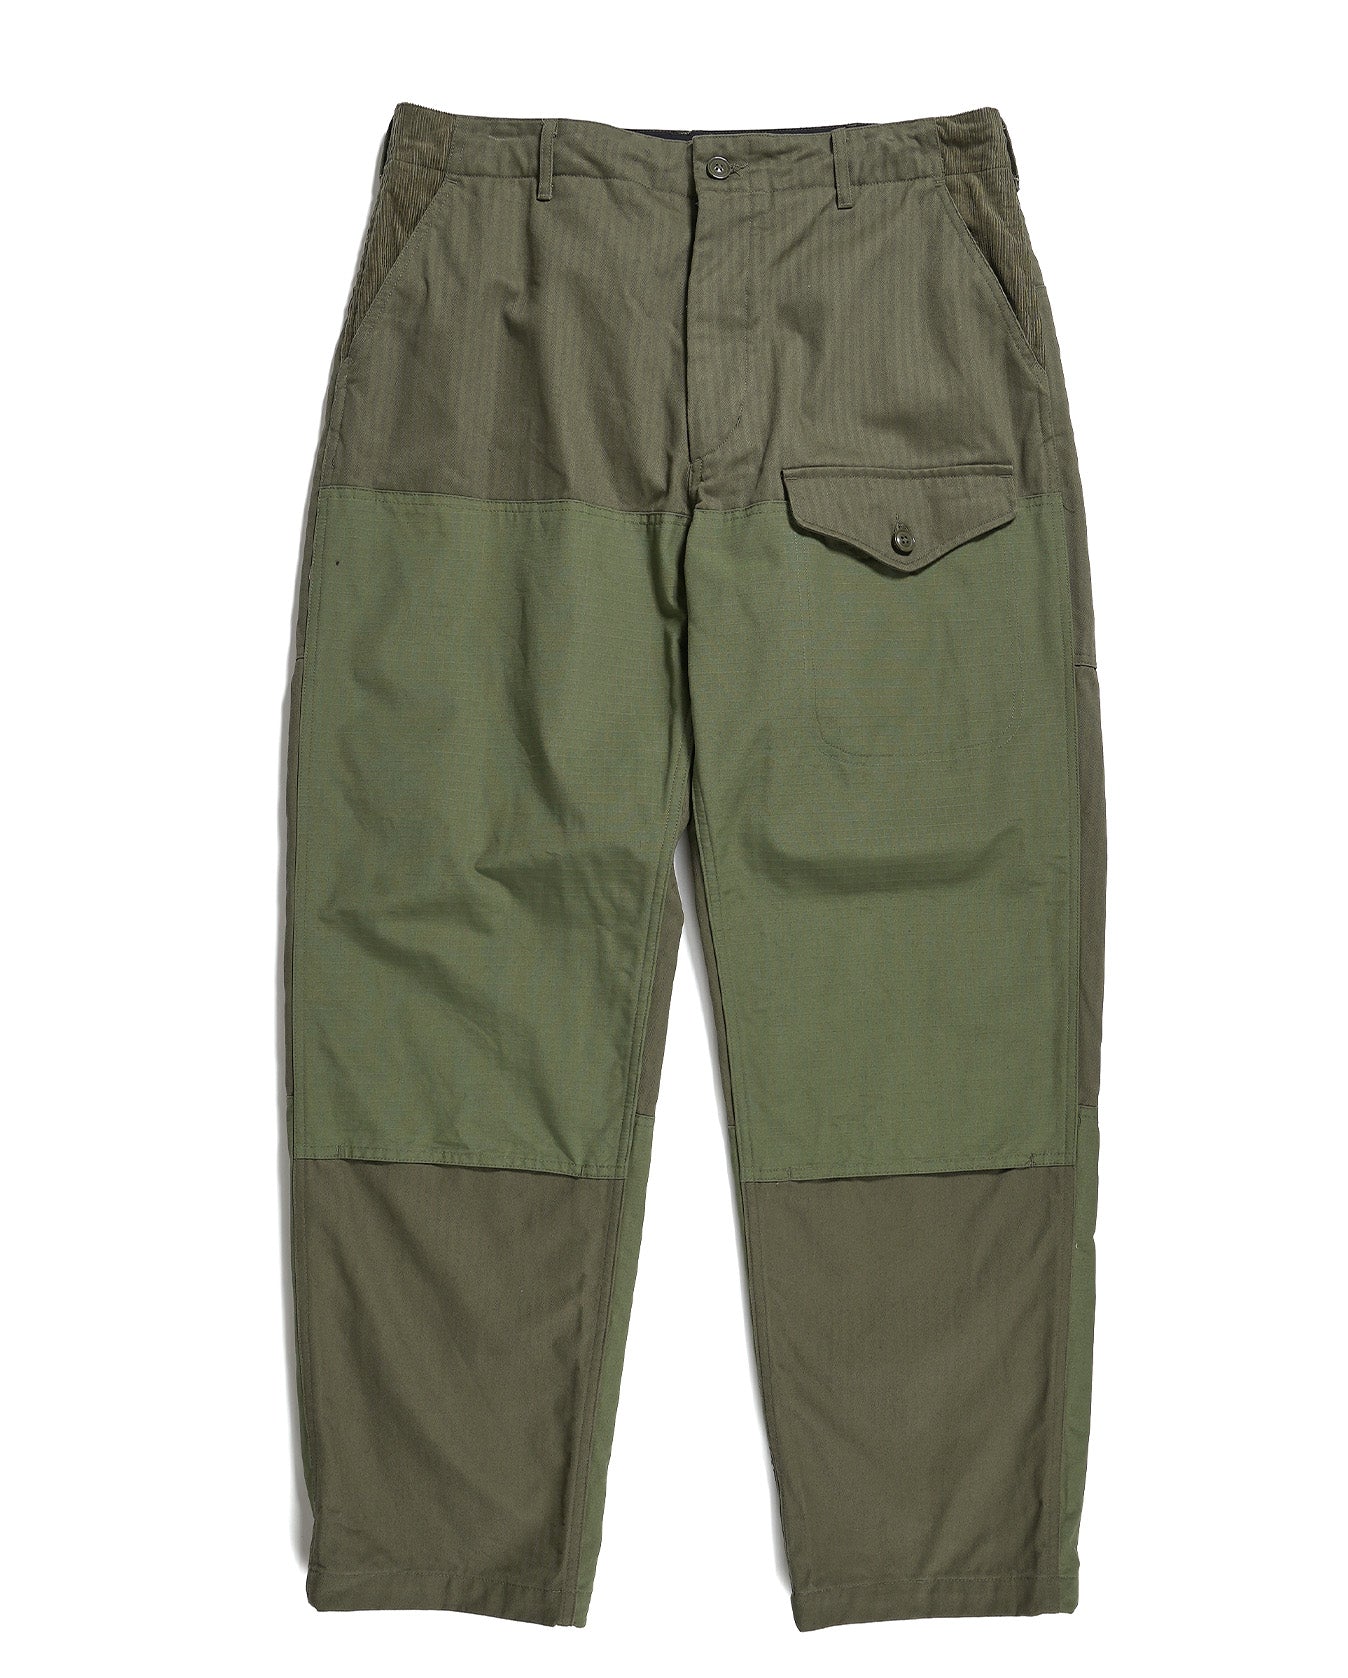 Flat Front Trouser in Olive Stretch Cotton Twill - Cad & The Dandy